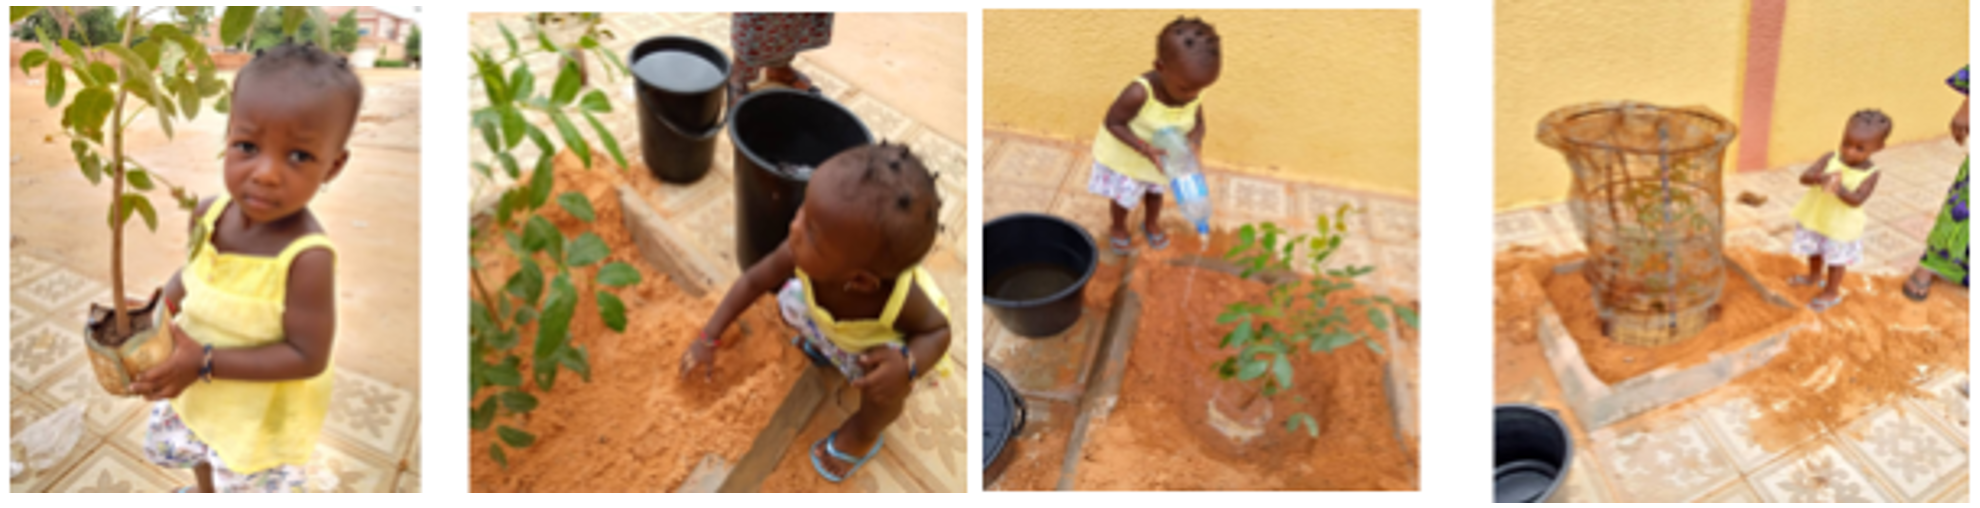 Left to Right: 1: Photo of a young girl holding a tree seedling. 2: Photo of a young girl helping to plant a tree. 3: Photo of a young girl watering a newly planted tree. 4: Photo of a young girl standing next to a staked newly planted tree. 